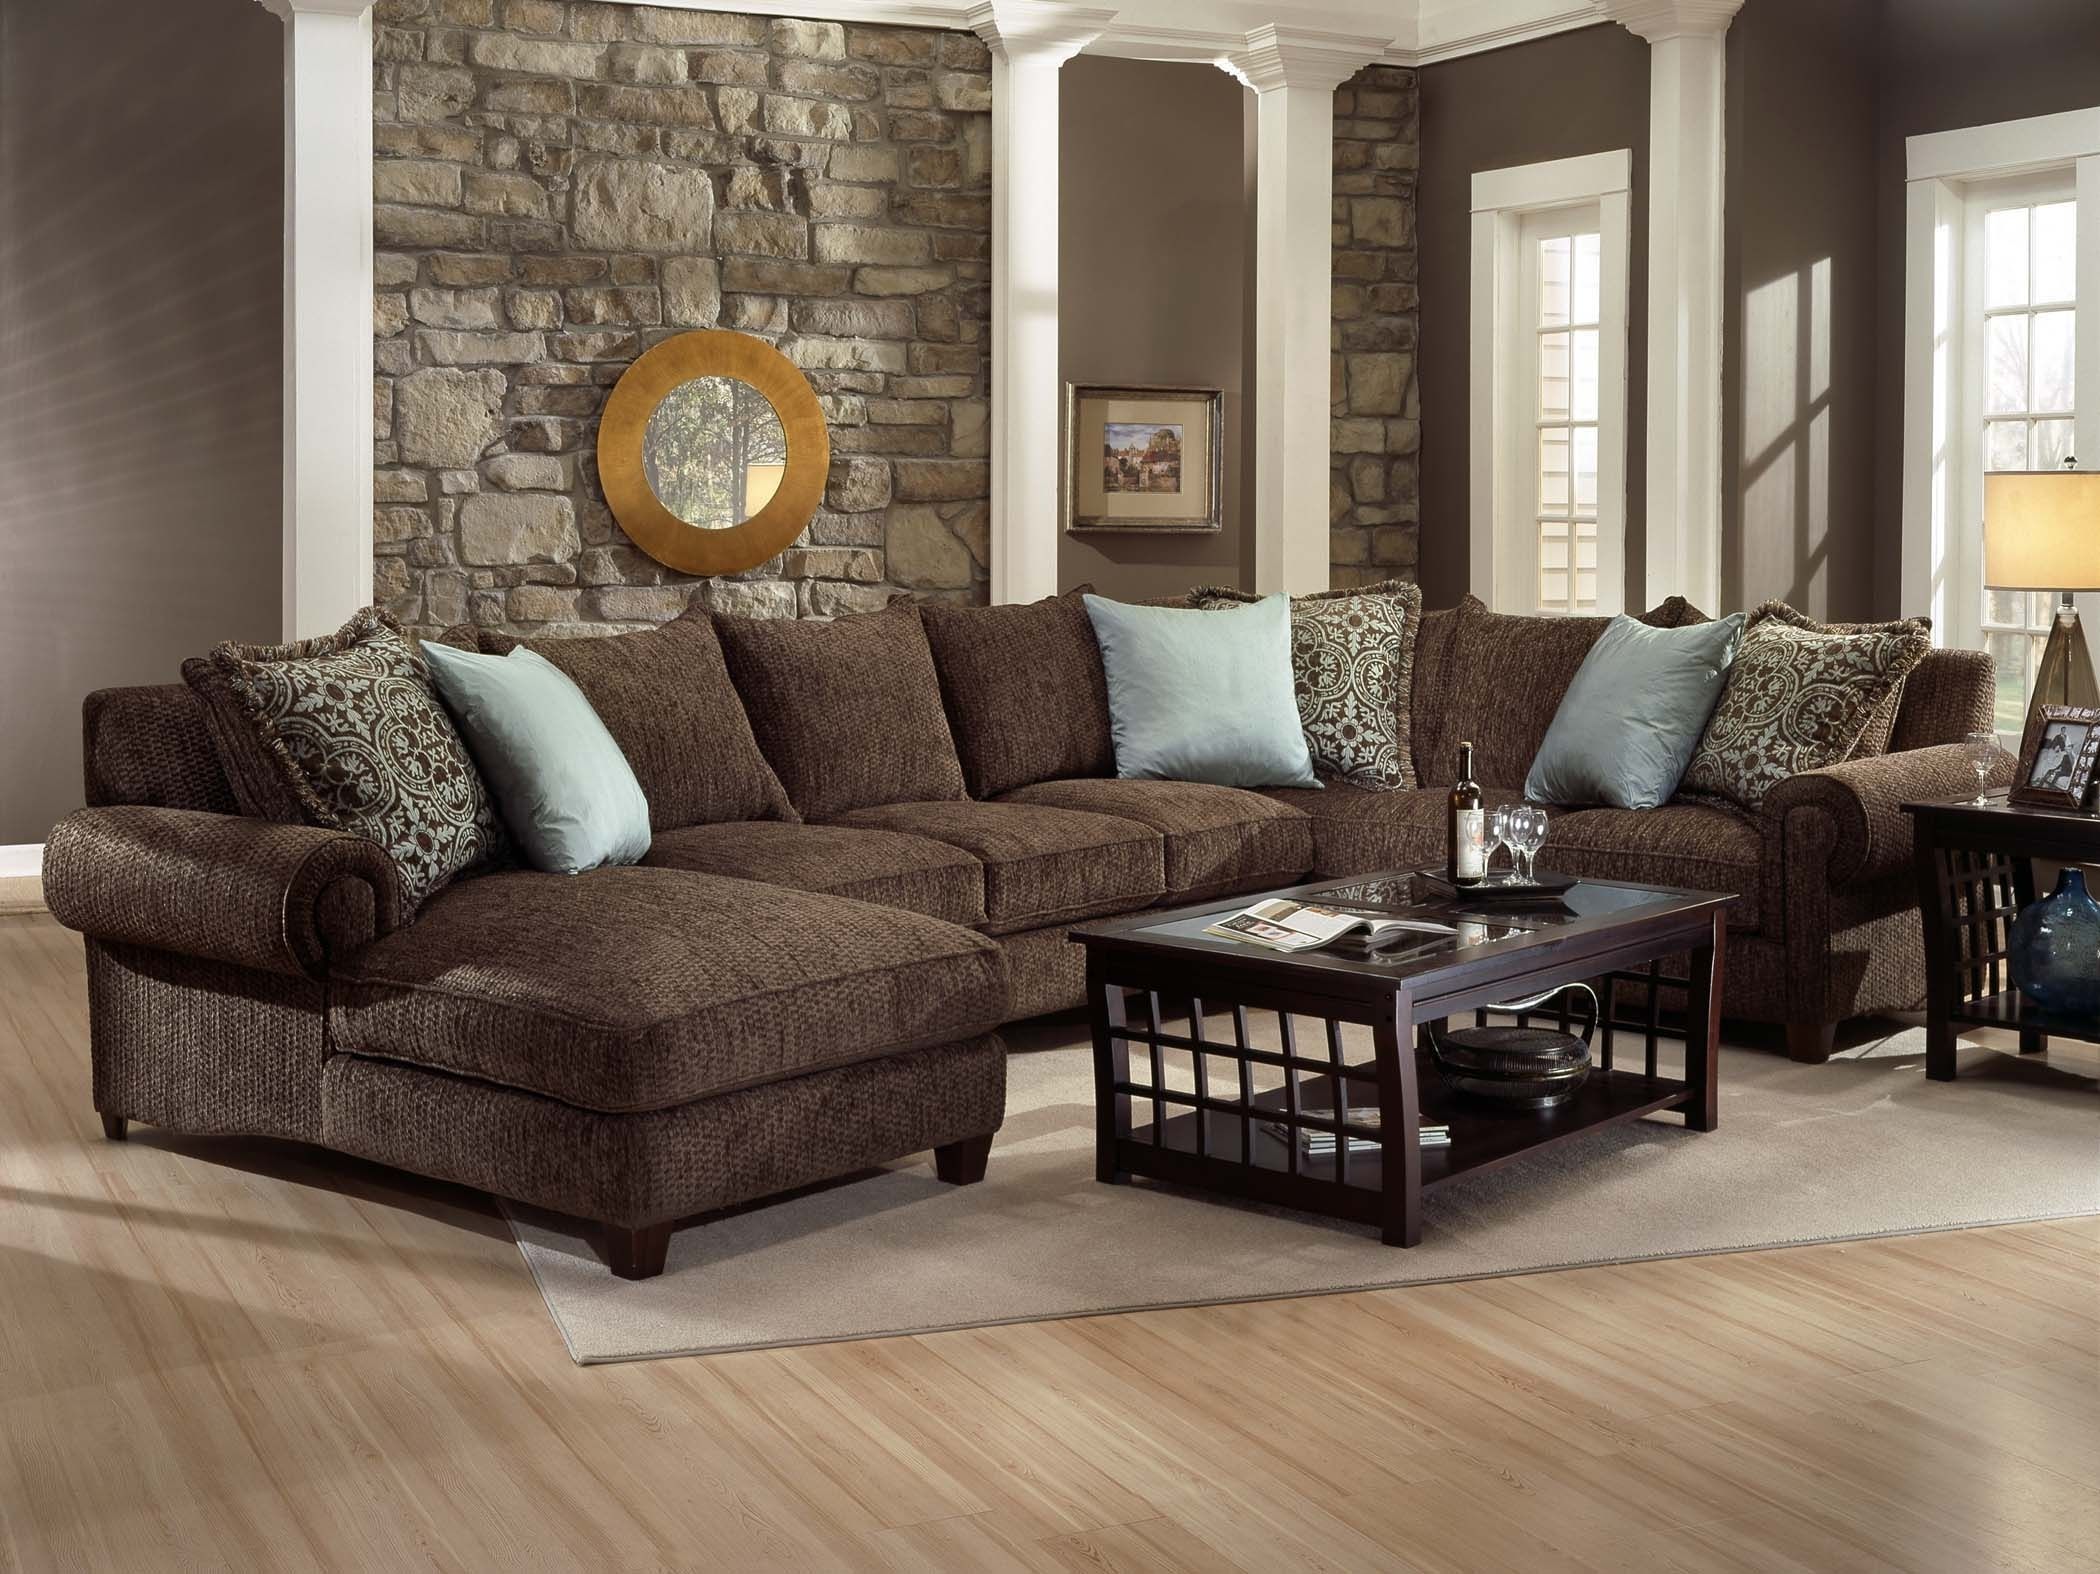 Sectional Sofa Design: Wonderful Sectional Sofas Denver Best Leather With Denver Sectional Sofas (Photo 6 of 10)